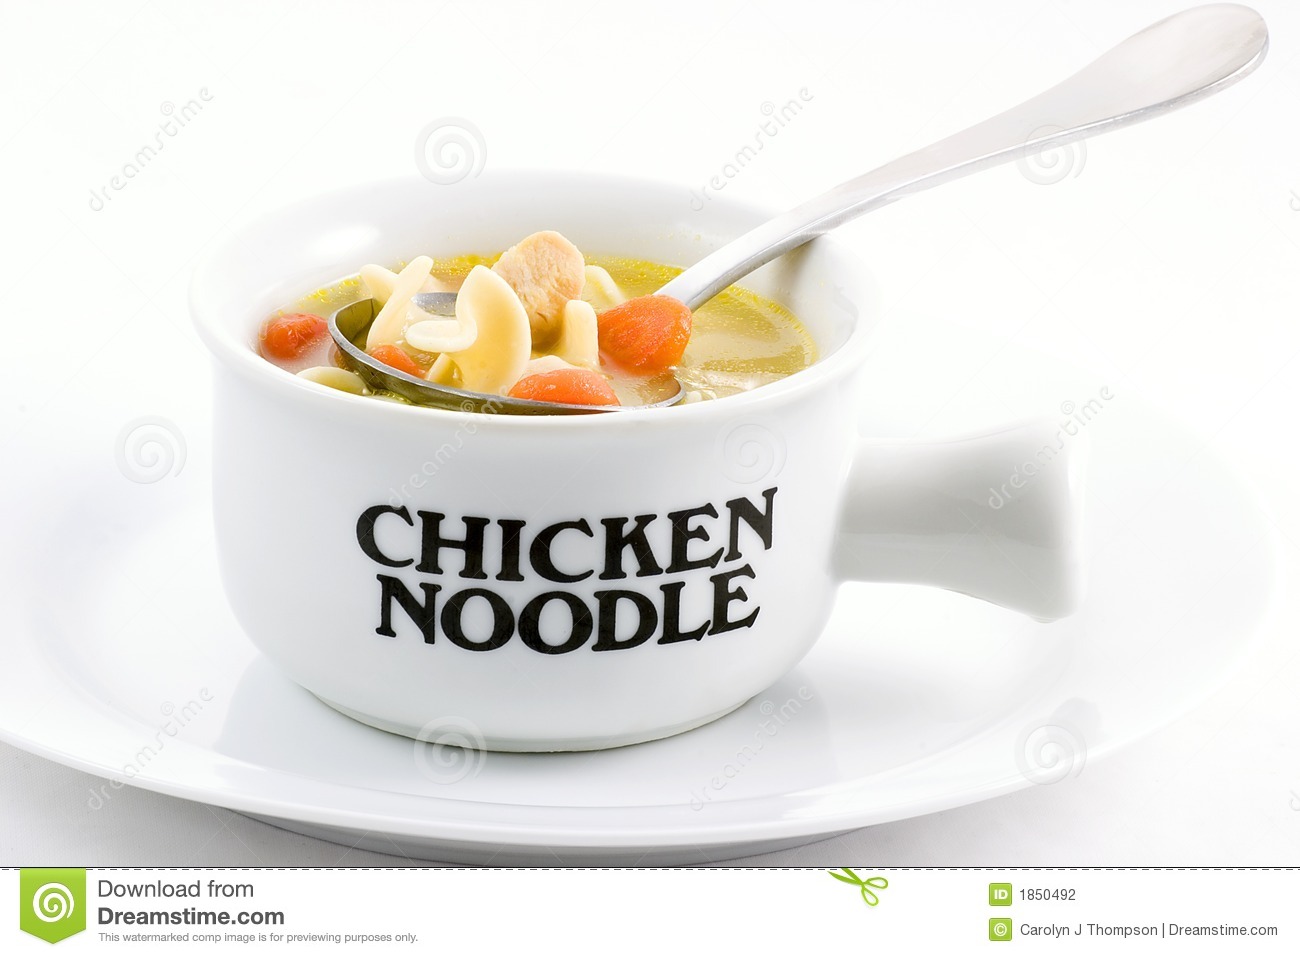 Chicken Noodle Soup Is An All Time Favorite With The Family It Is